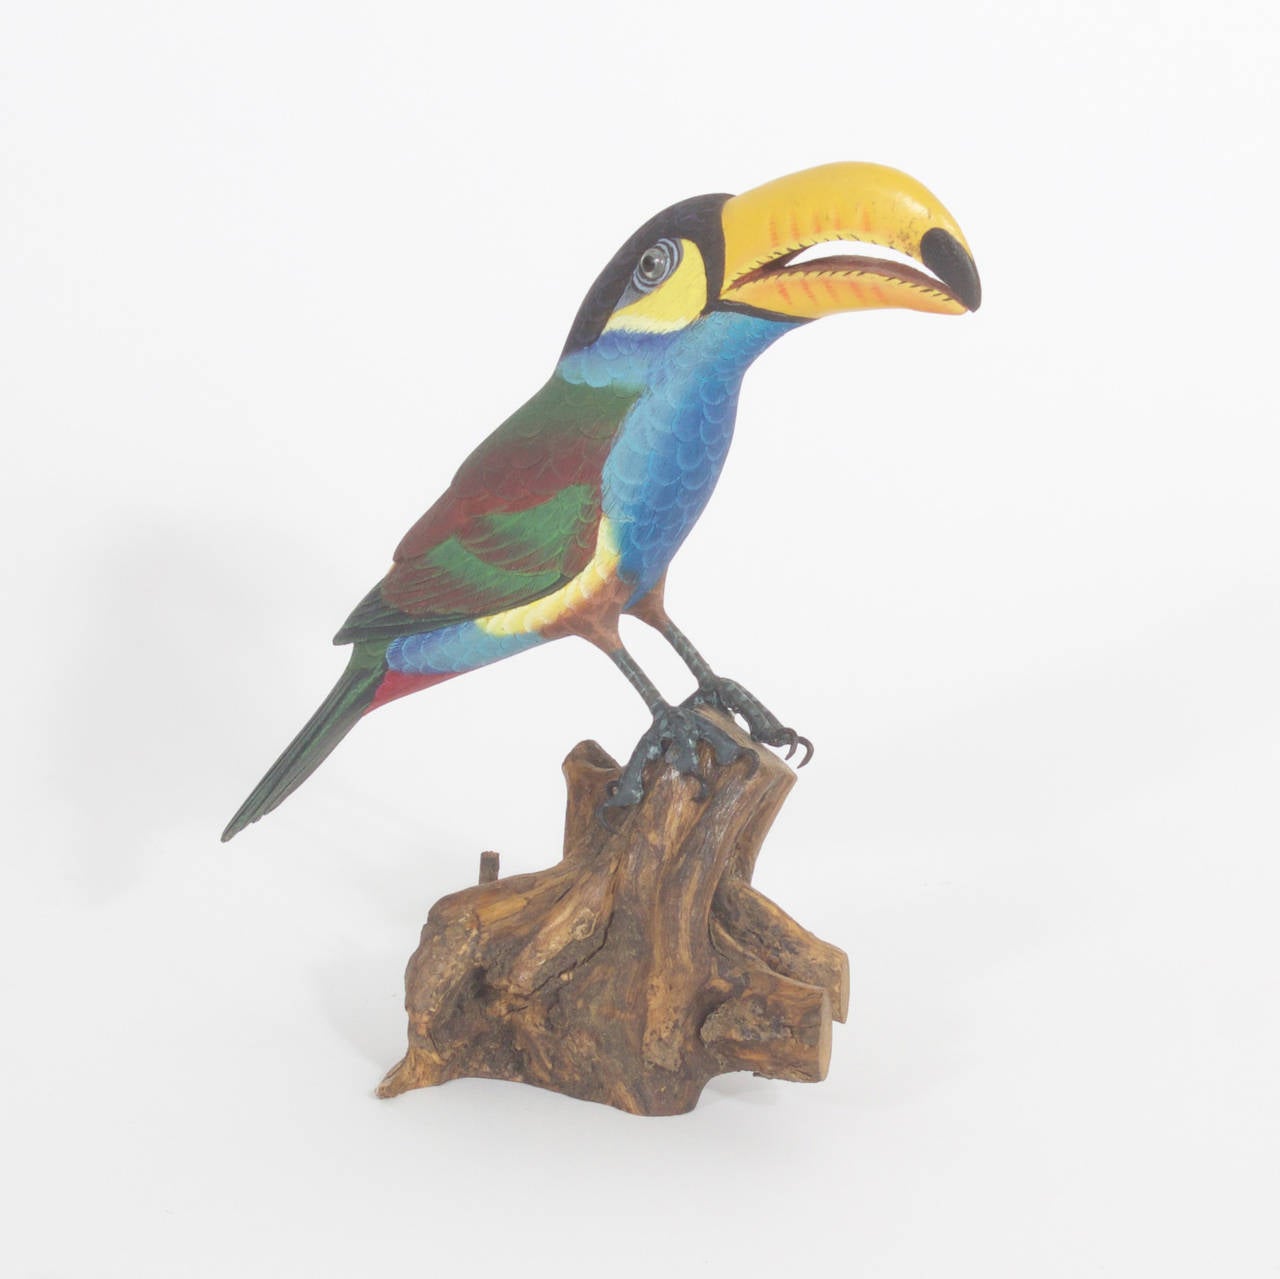 Carved and painted wood Toucan. Expertly carved and painted with unexpected life like details and brilliant colors. Featuring real bird talons attached to the feet and glass eyes and presented on a tree branch. We have 2 parrots by the same maker.